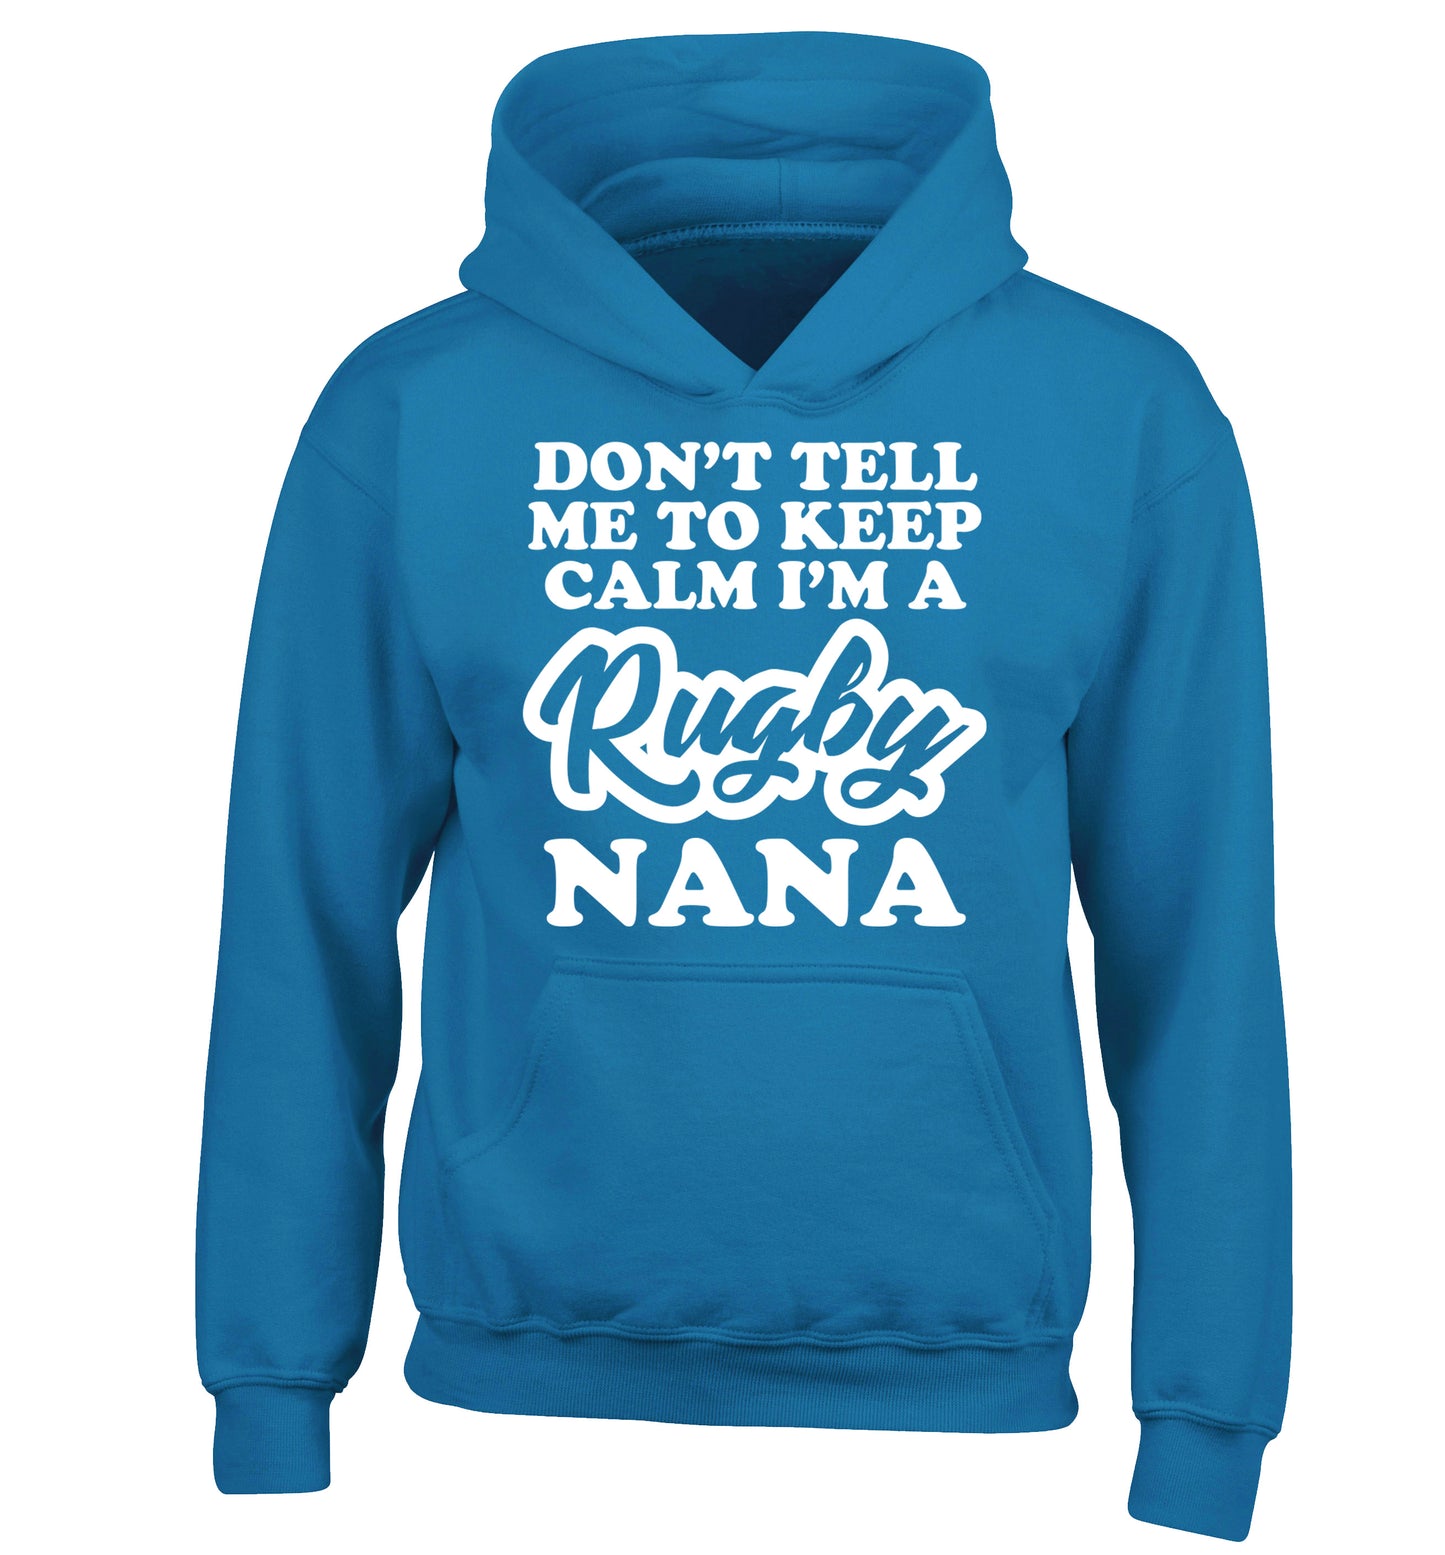 Don't tell me to keep calm I'm a rugby nana children's blue hoodie 12-13 Years